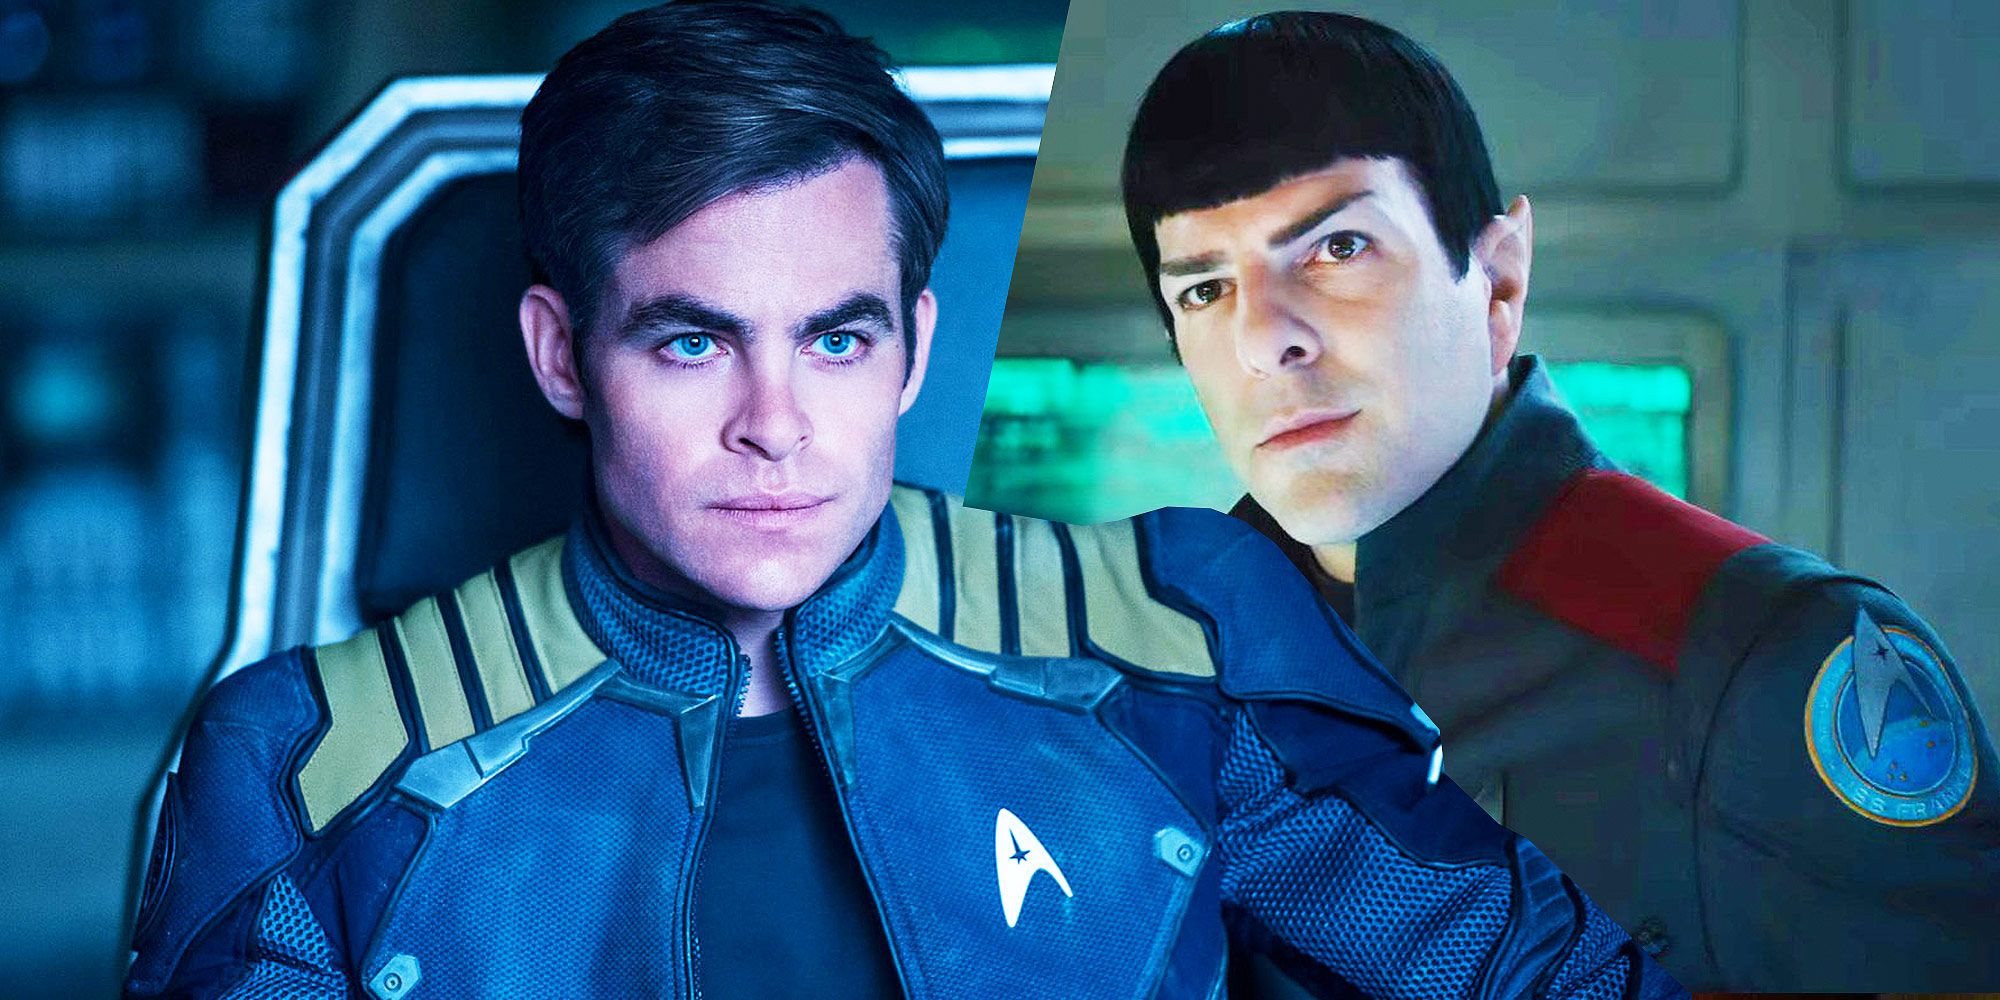 Star Trek 4’s Release Date Delay Shows How The Franchise Has Changed